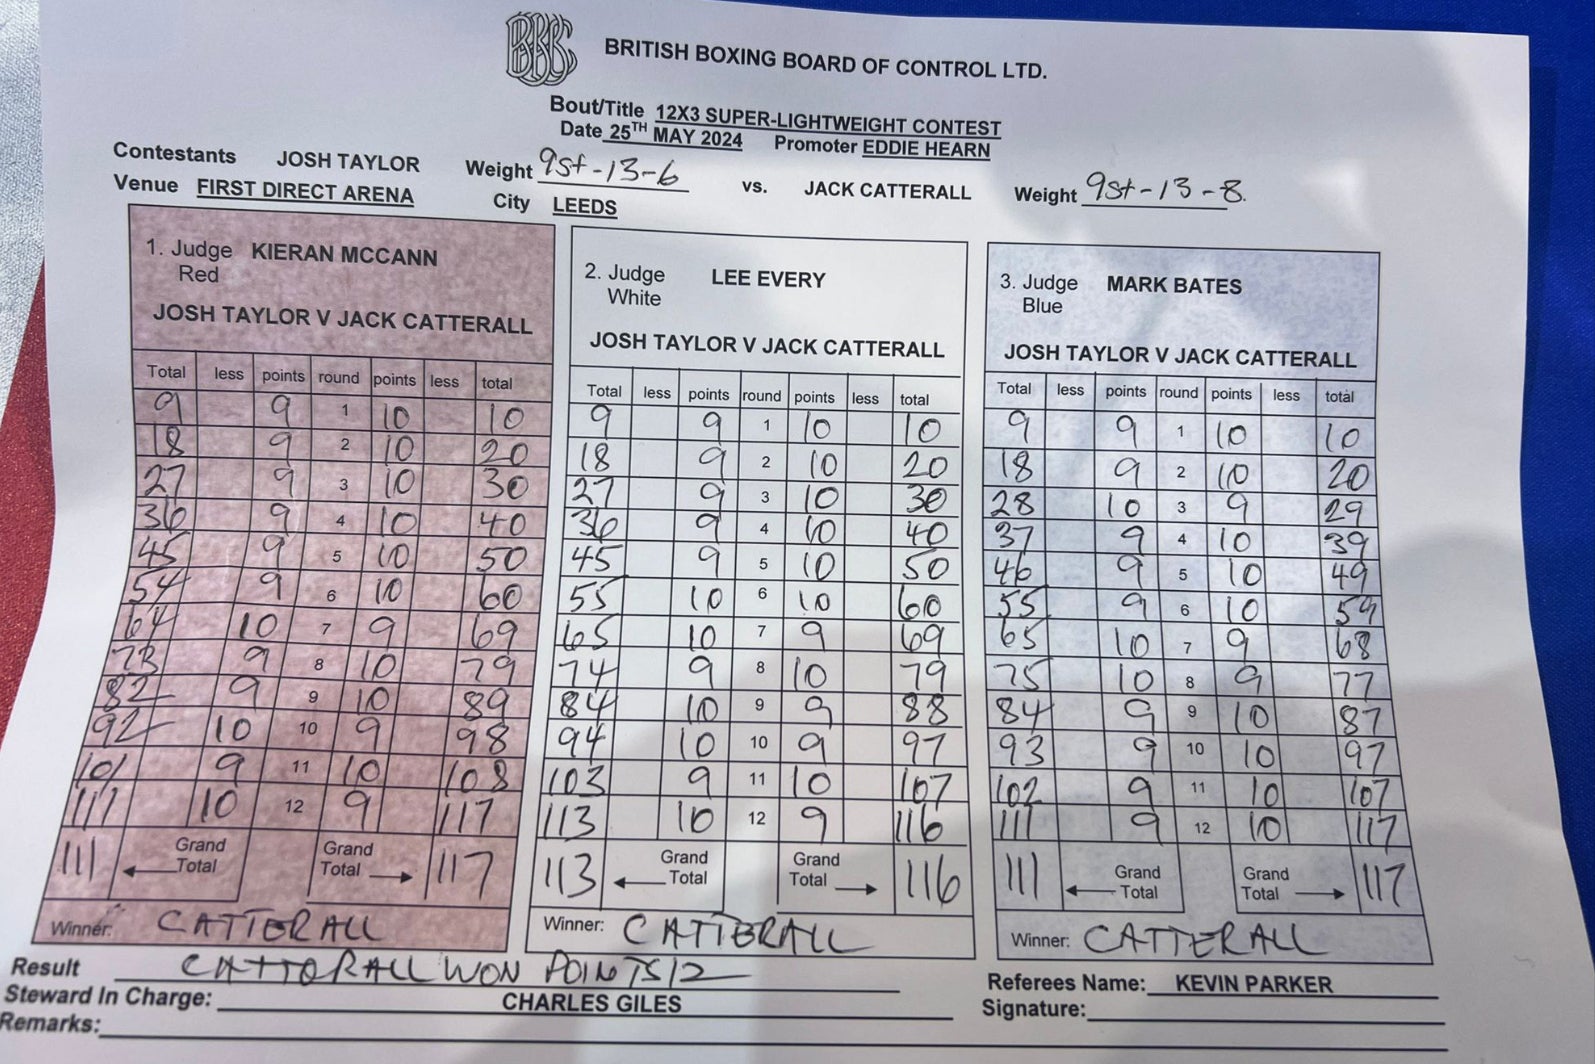 The official Taylor vs Catterall 2 scorecards